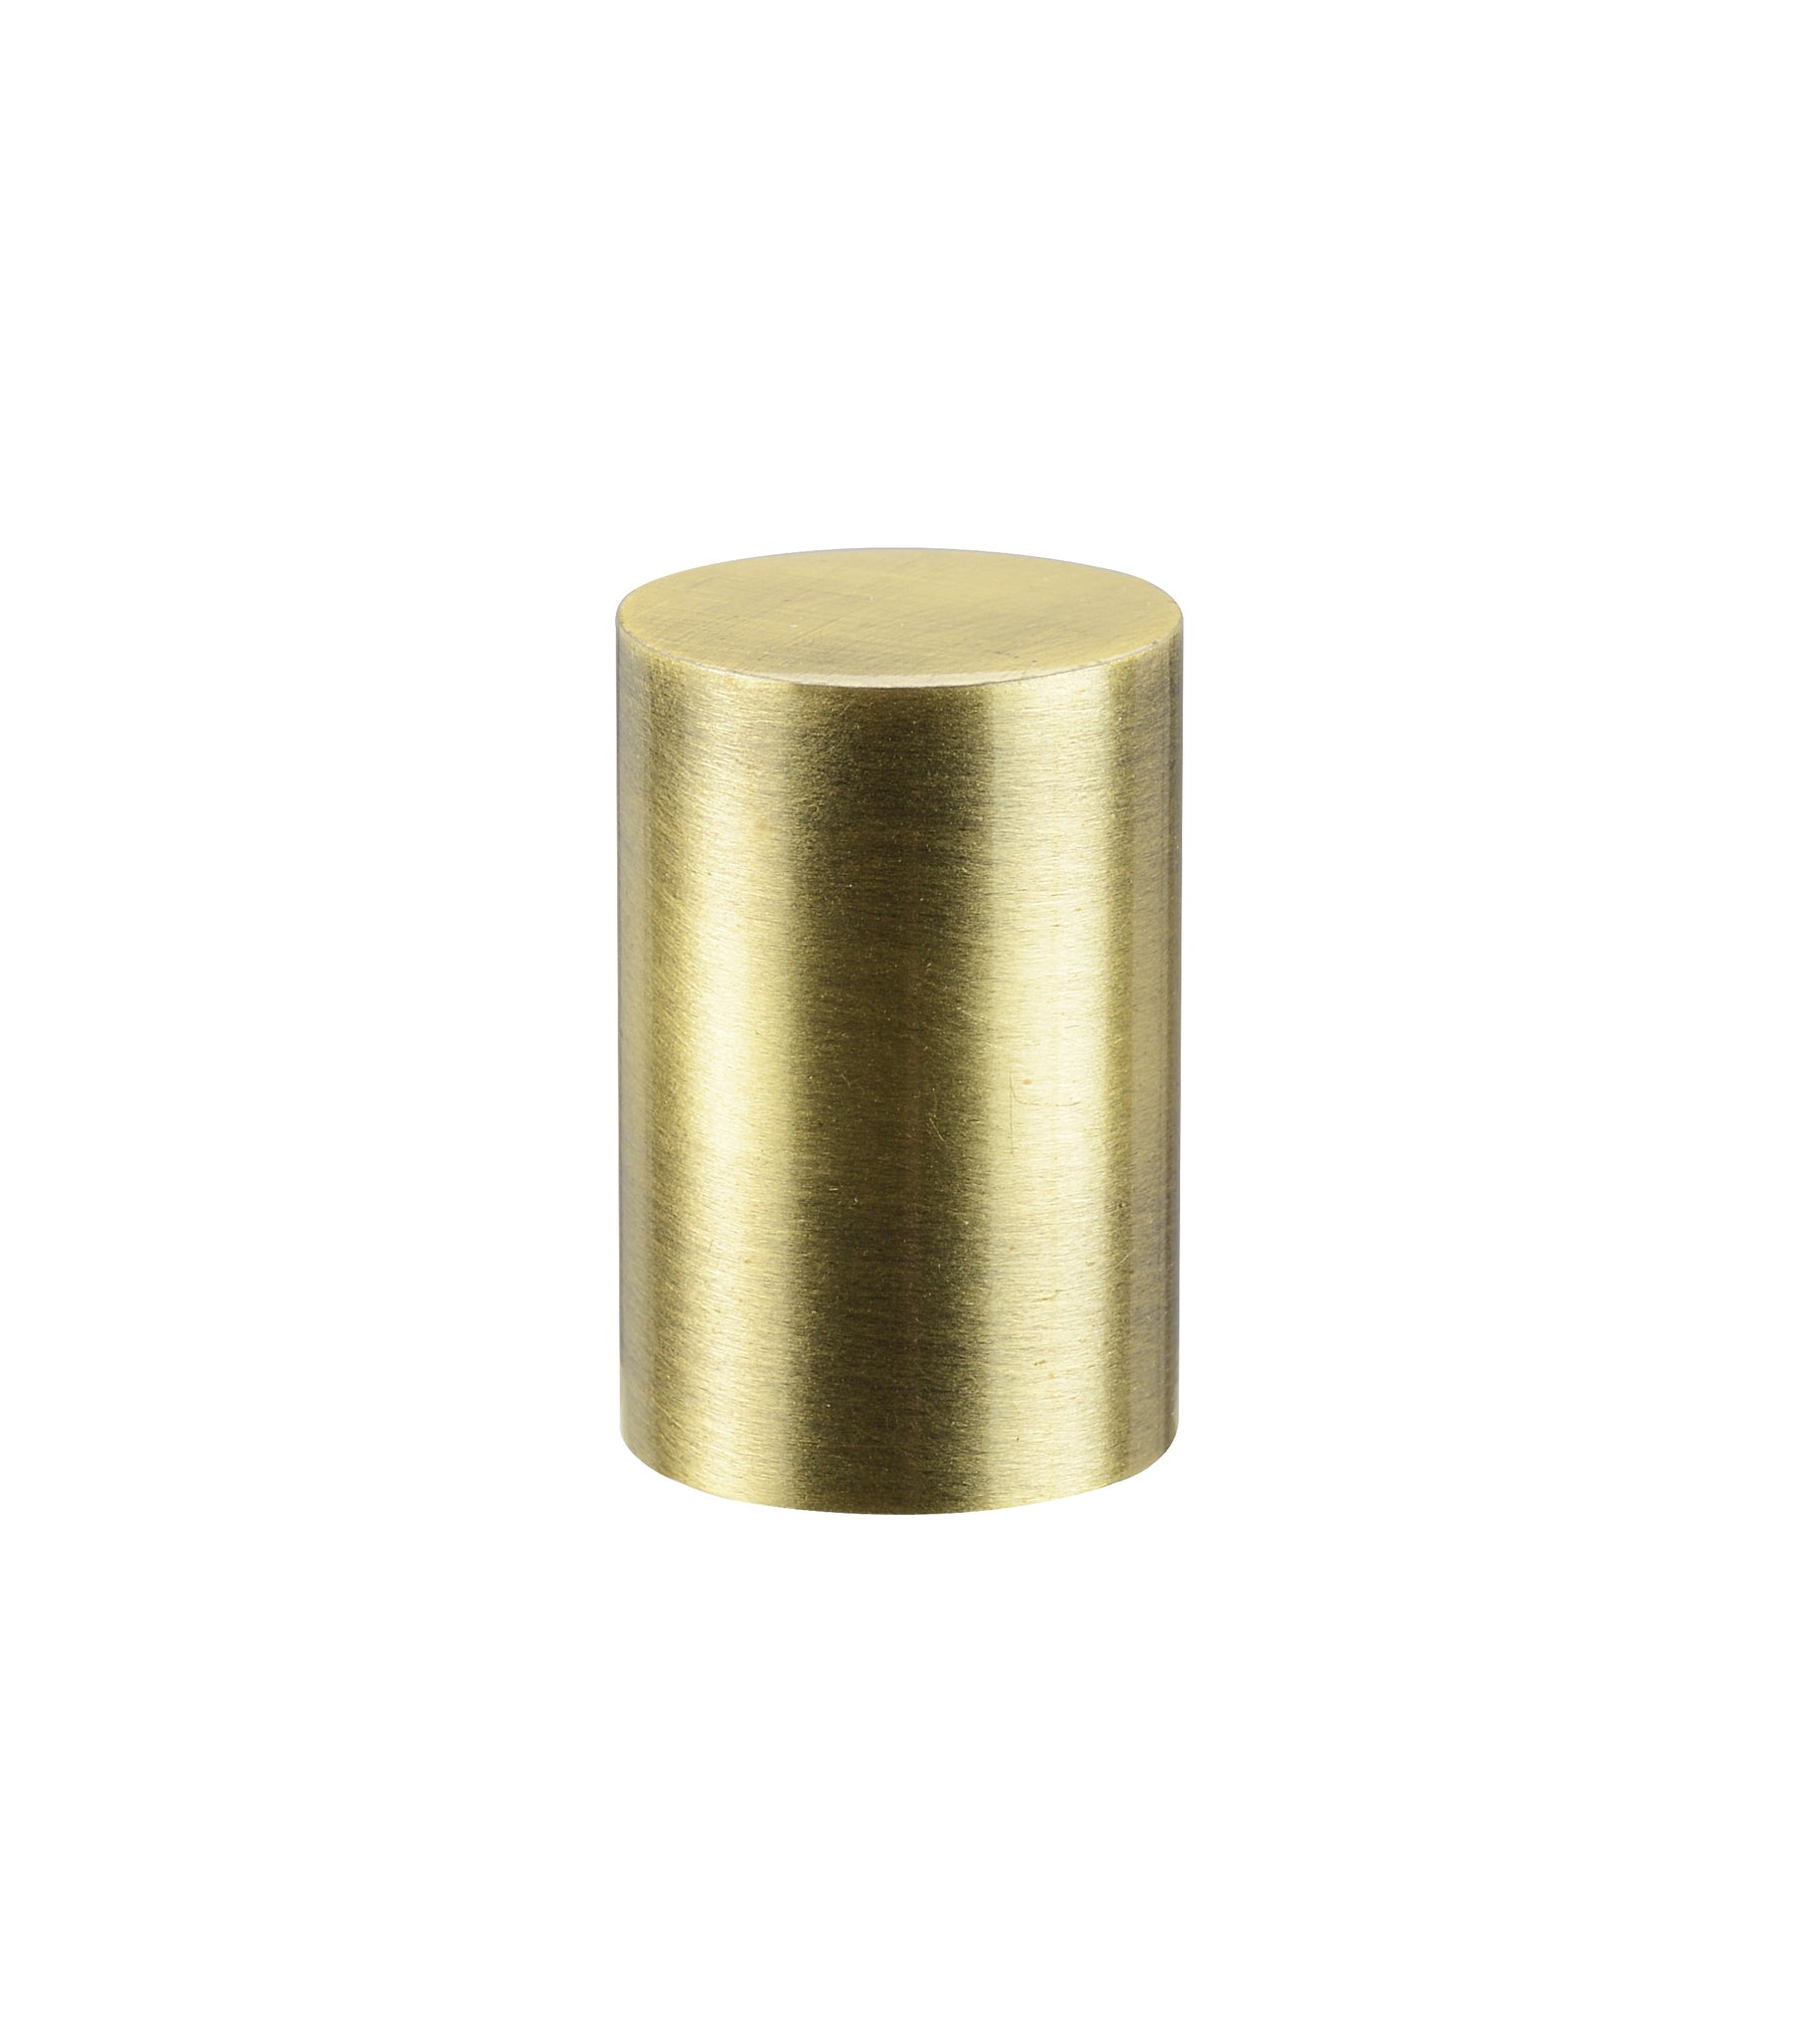 24019-41, 1 Pack Steel Lamp Finial in Antique Brass Finish, 1 1/4